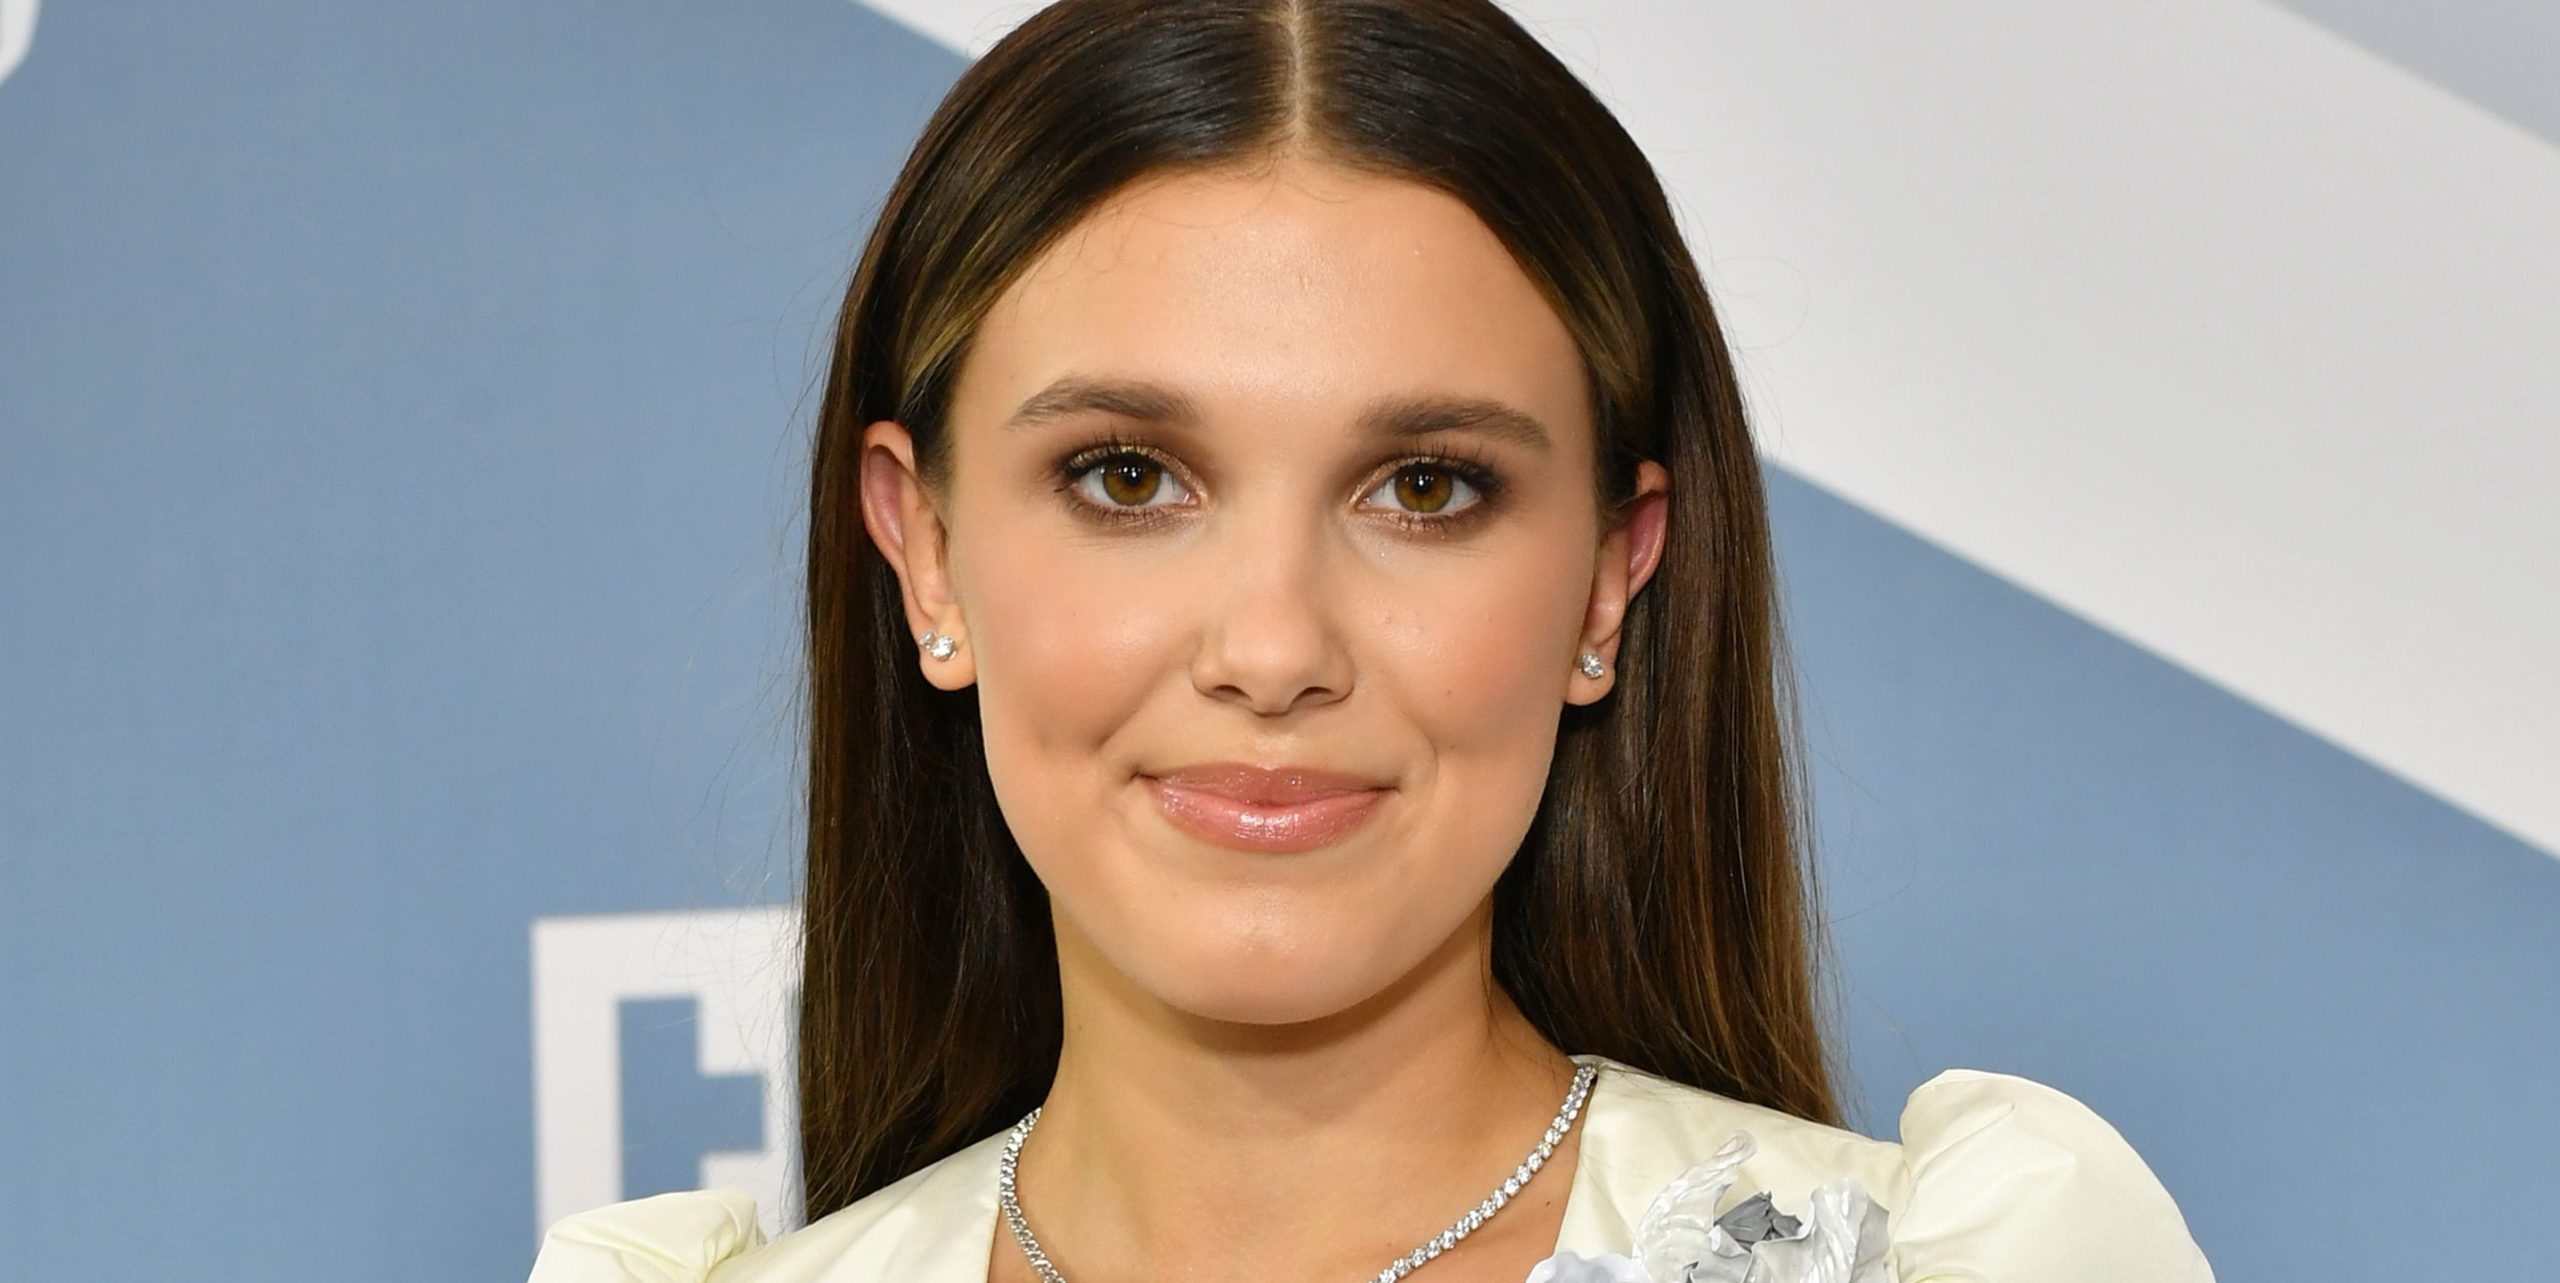 Millie Bobby Brown Wiki, Bio, Age, Net Worth, and Other Facts